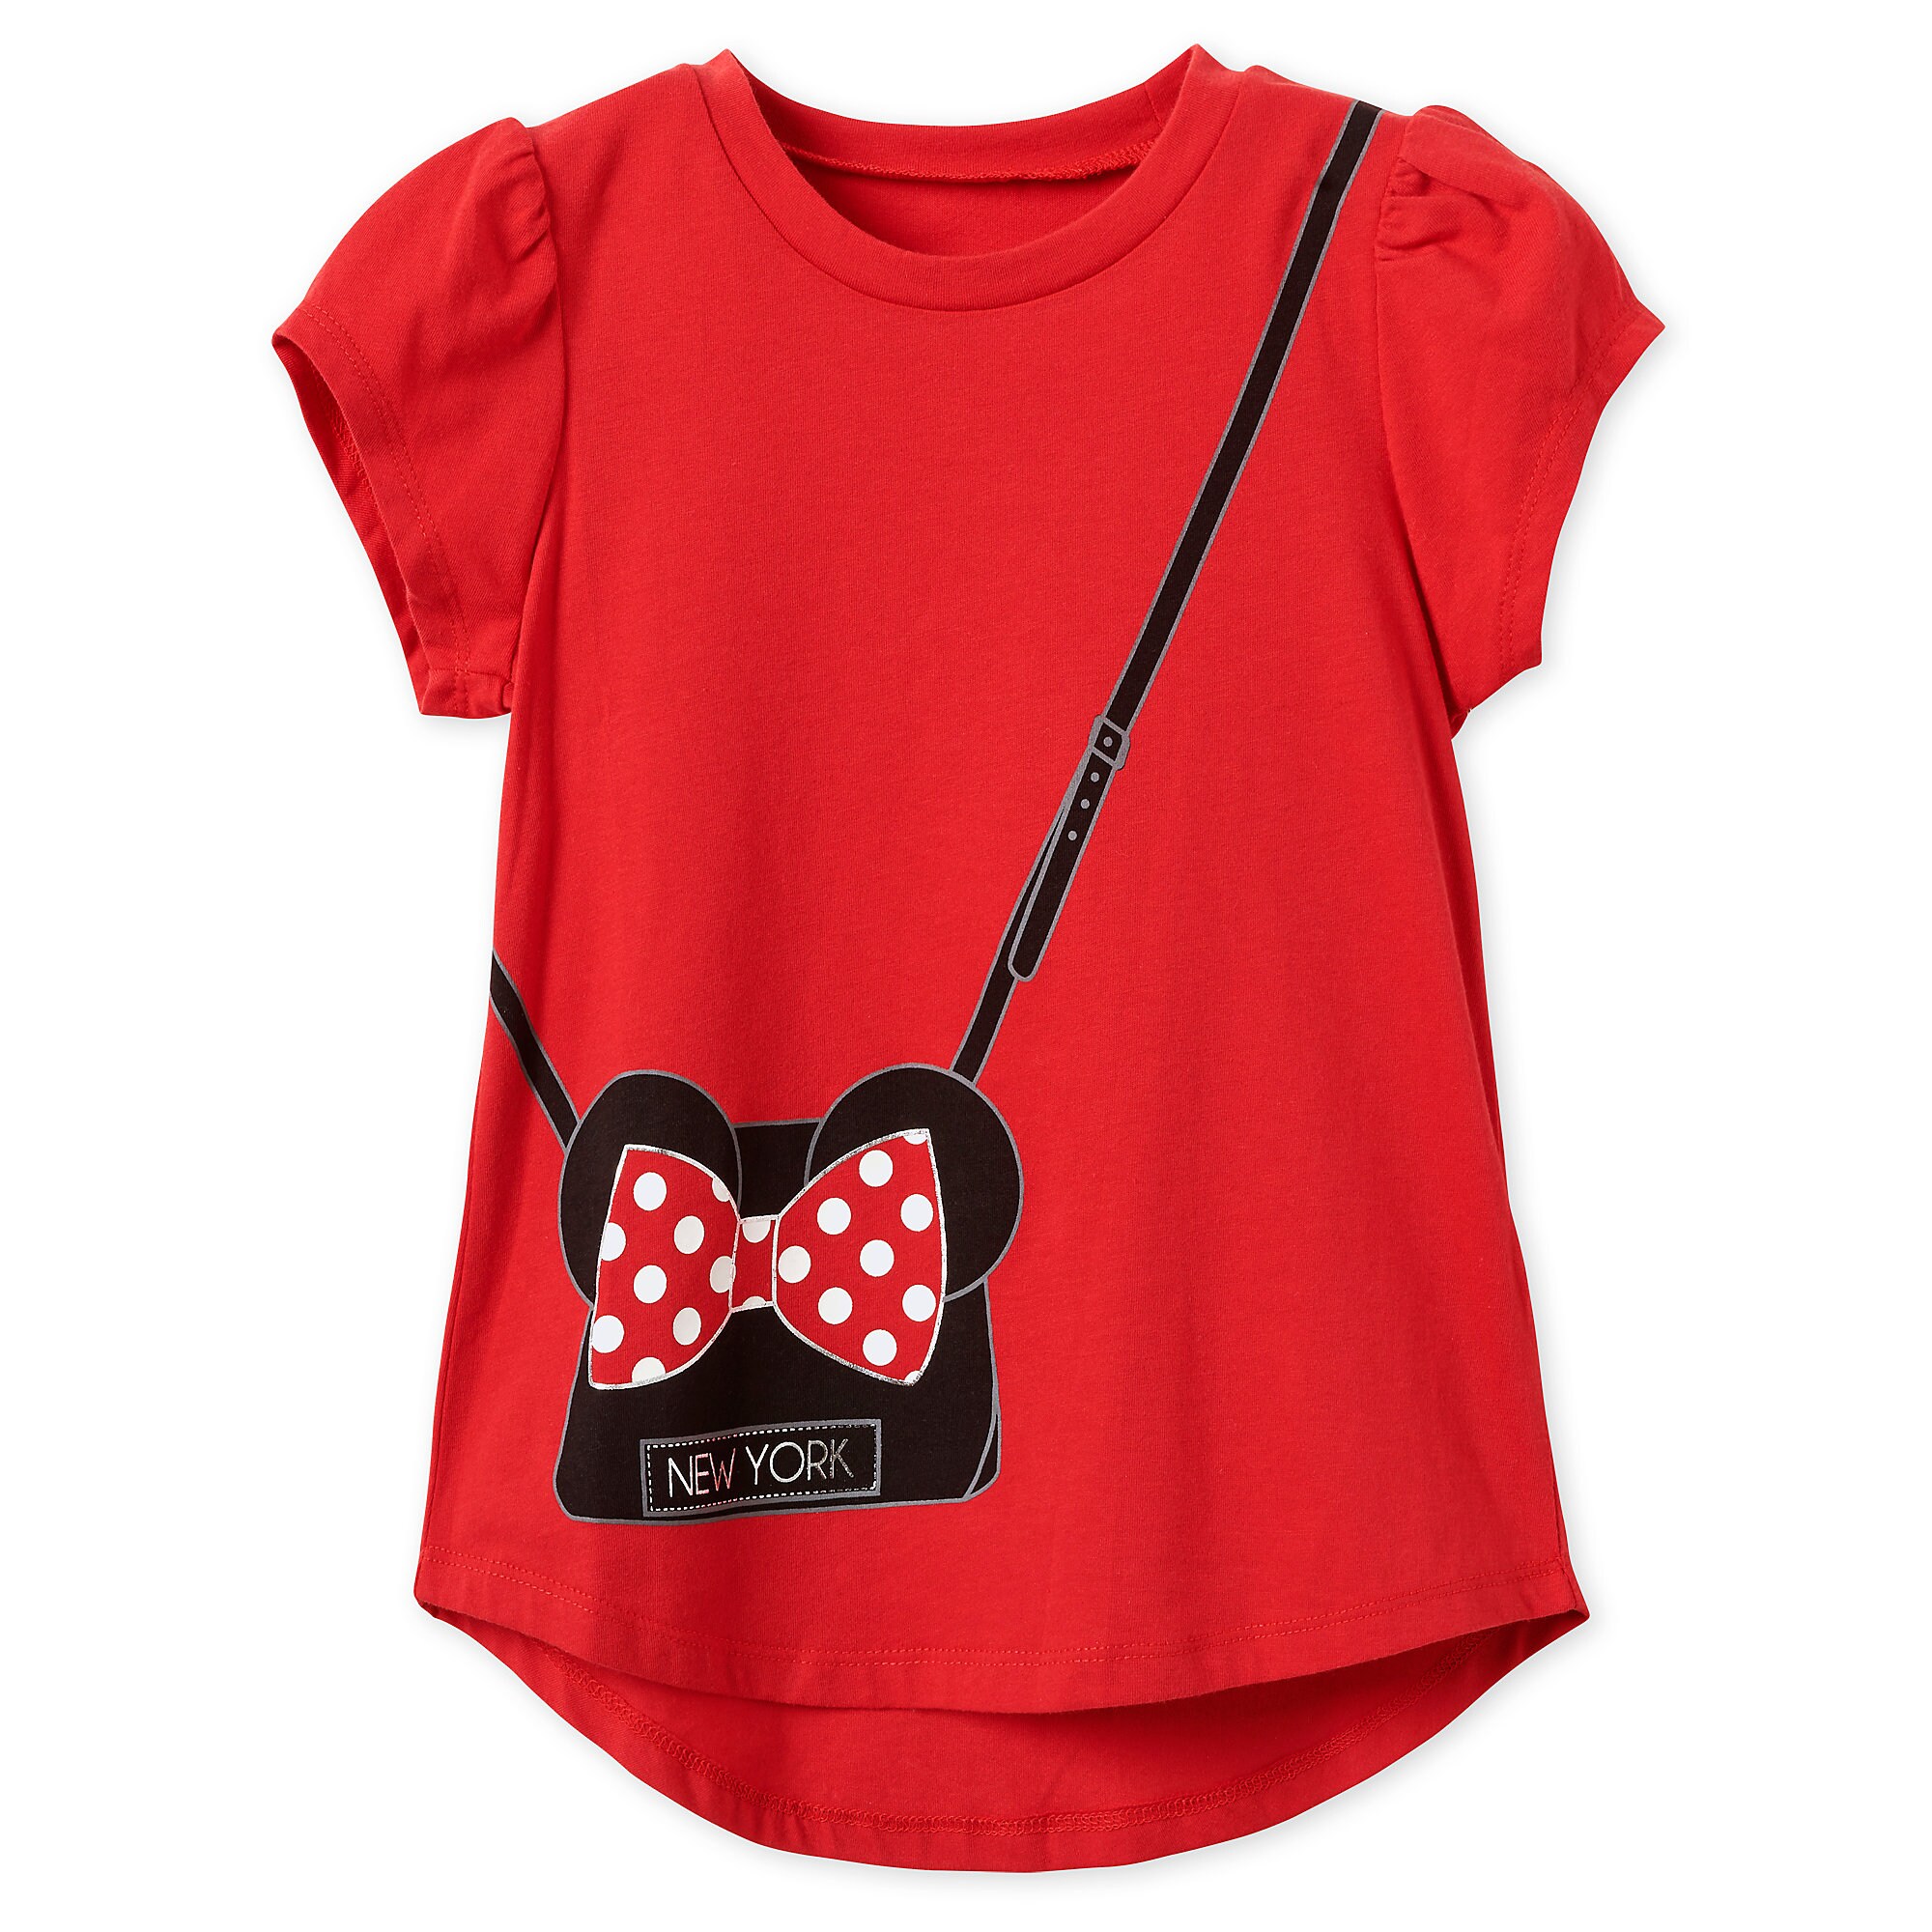 Minnie Mouse Purse T-Shirt for Girls - New York City